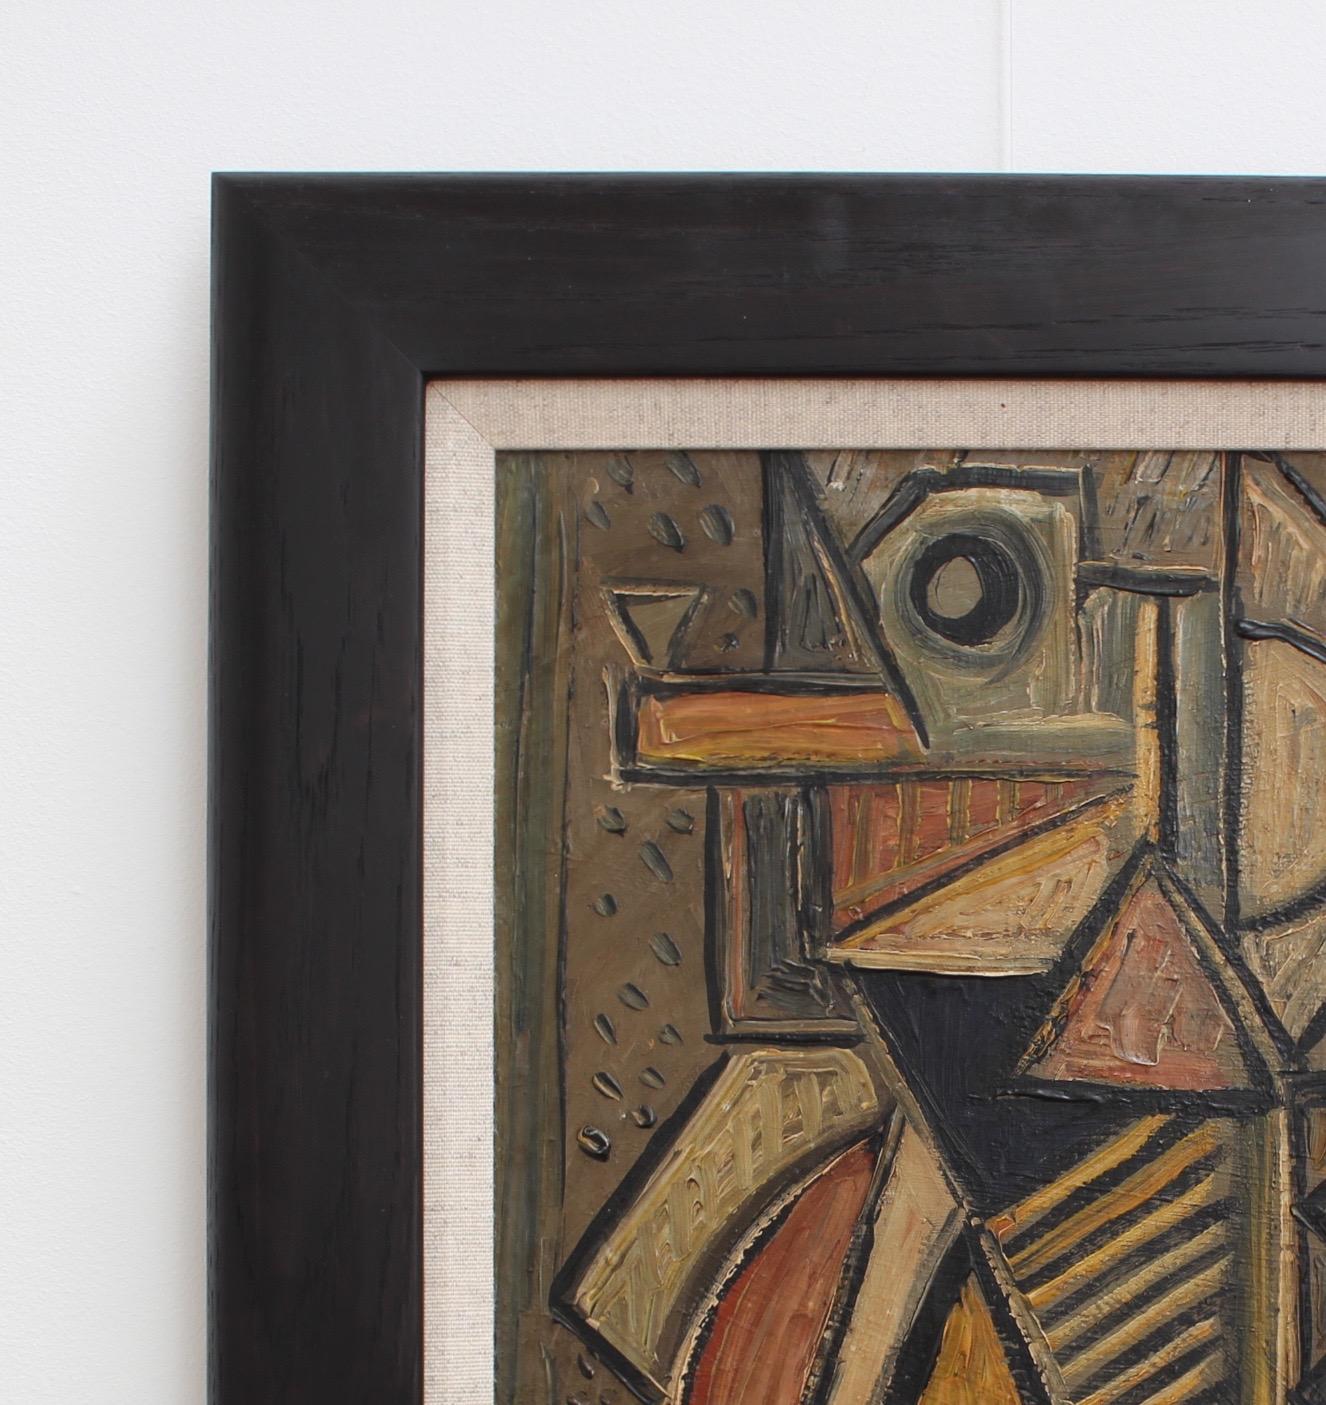 'Profile of a Seated Man', oil on board, by unknown artist (circa 1940s - 1950s). Inspired by the cubists such as Picasso and Braque, this work depicts a seated man in profile. As in other cubist works, objects and people are portrayed from various